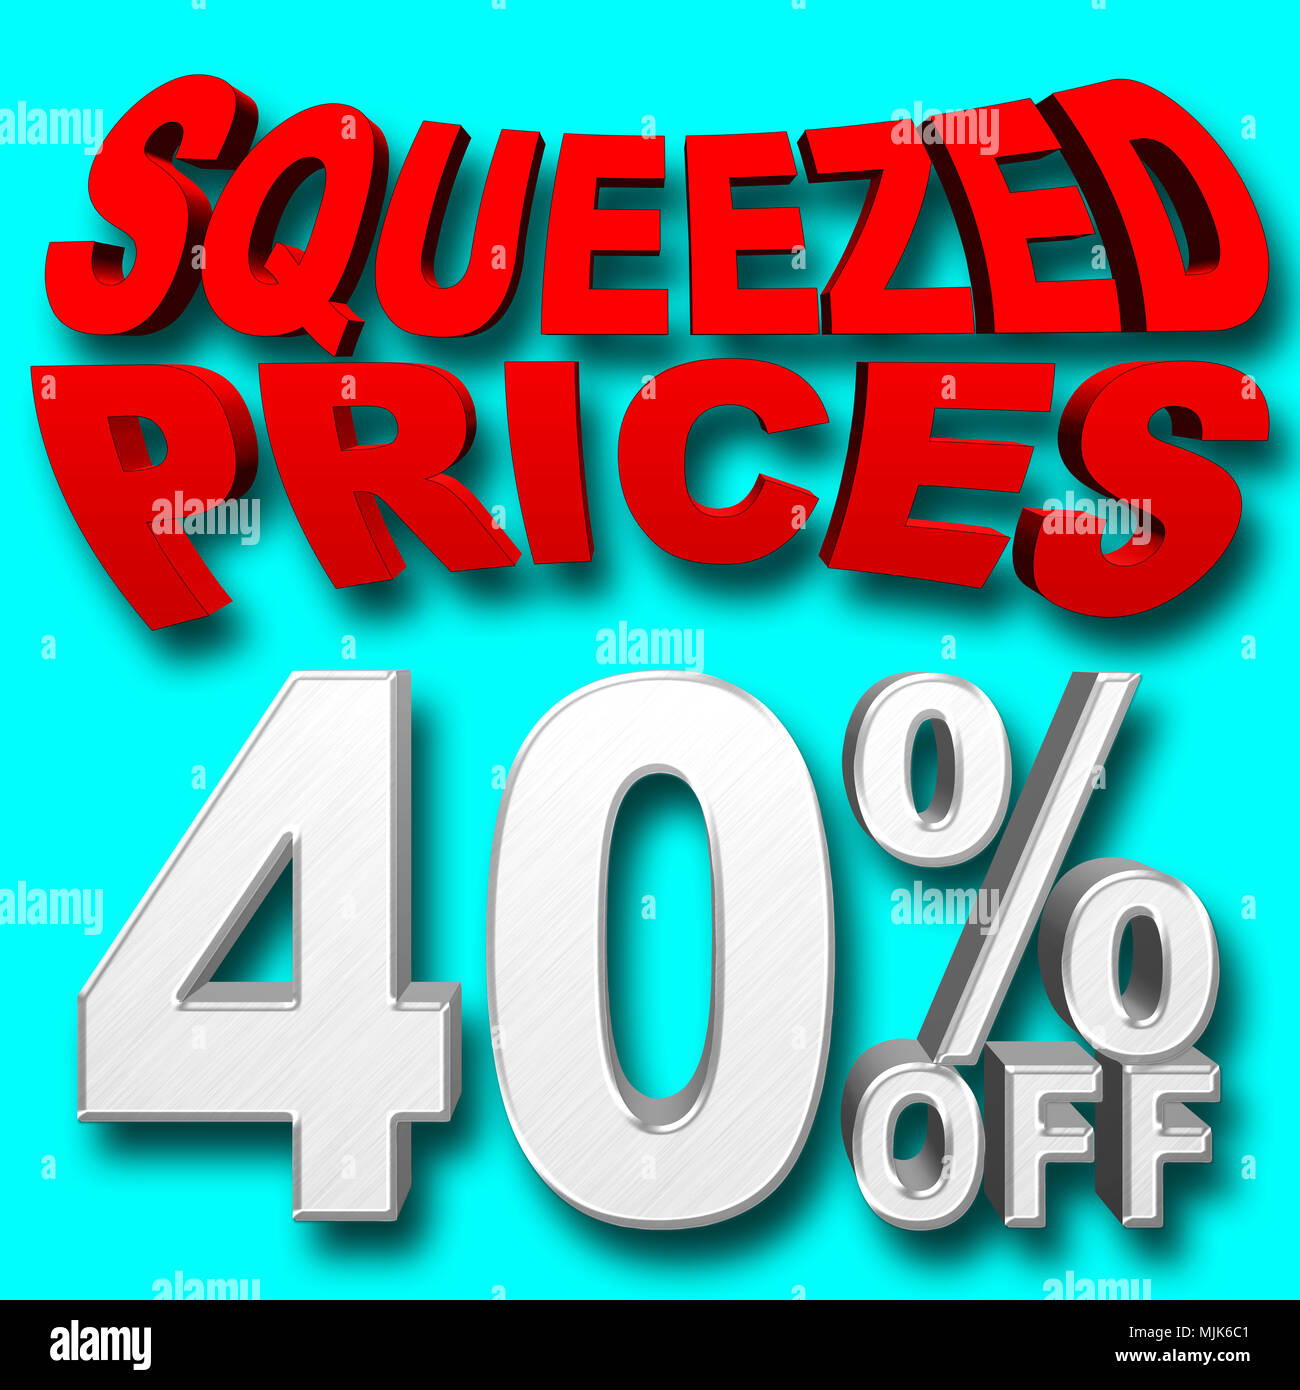 Stock Illustration - Large Shiny Silver Text: 40 Percentage Off, Red Text: Squeezed Prices, 3D Illustration, Blue Background, Different. Stock Photo